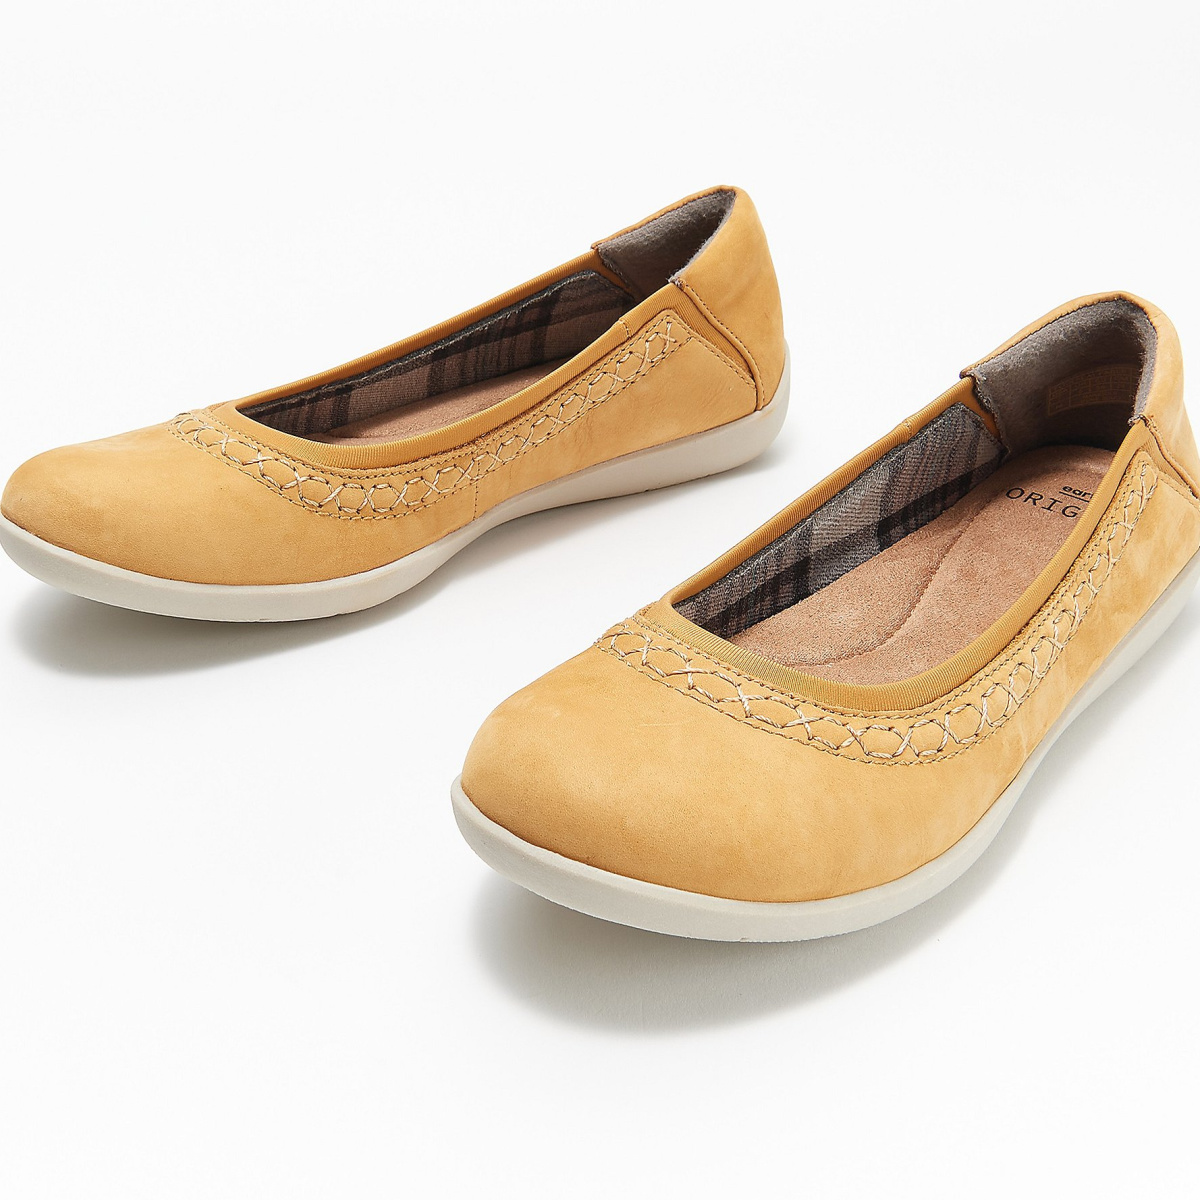 Earth Origins Fable Leather Whipstitch Flats